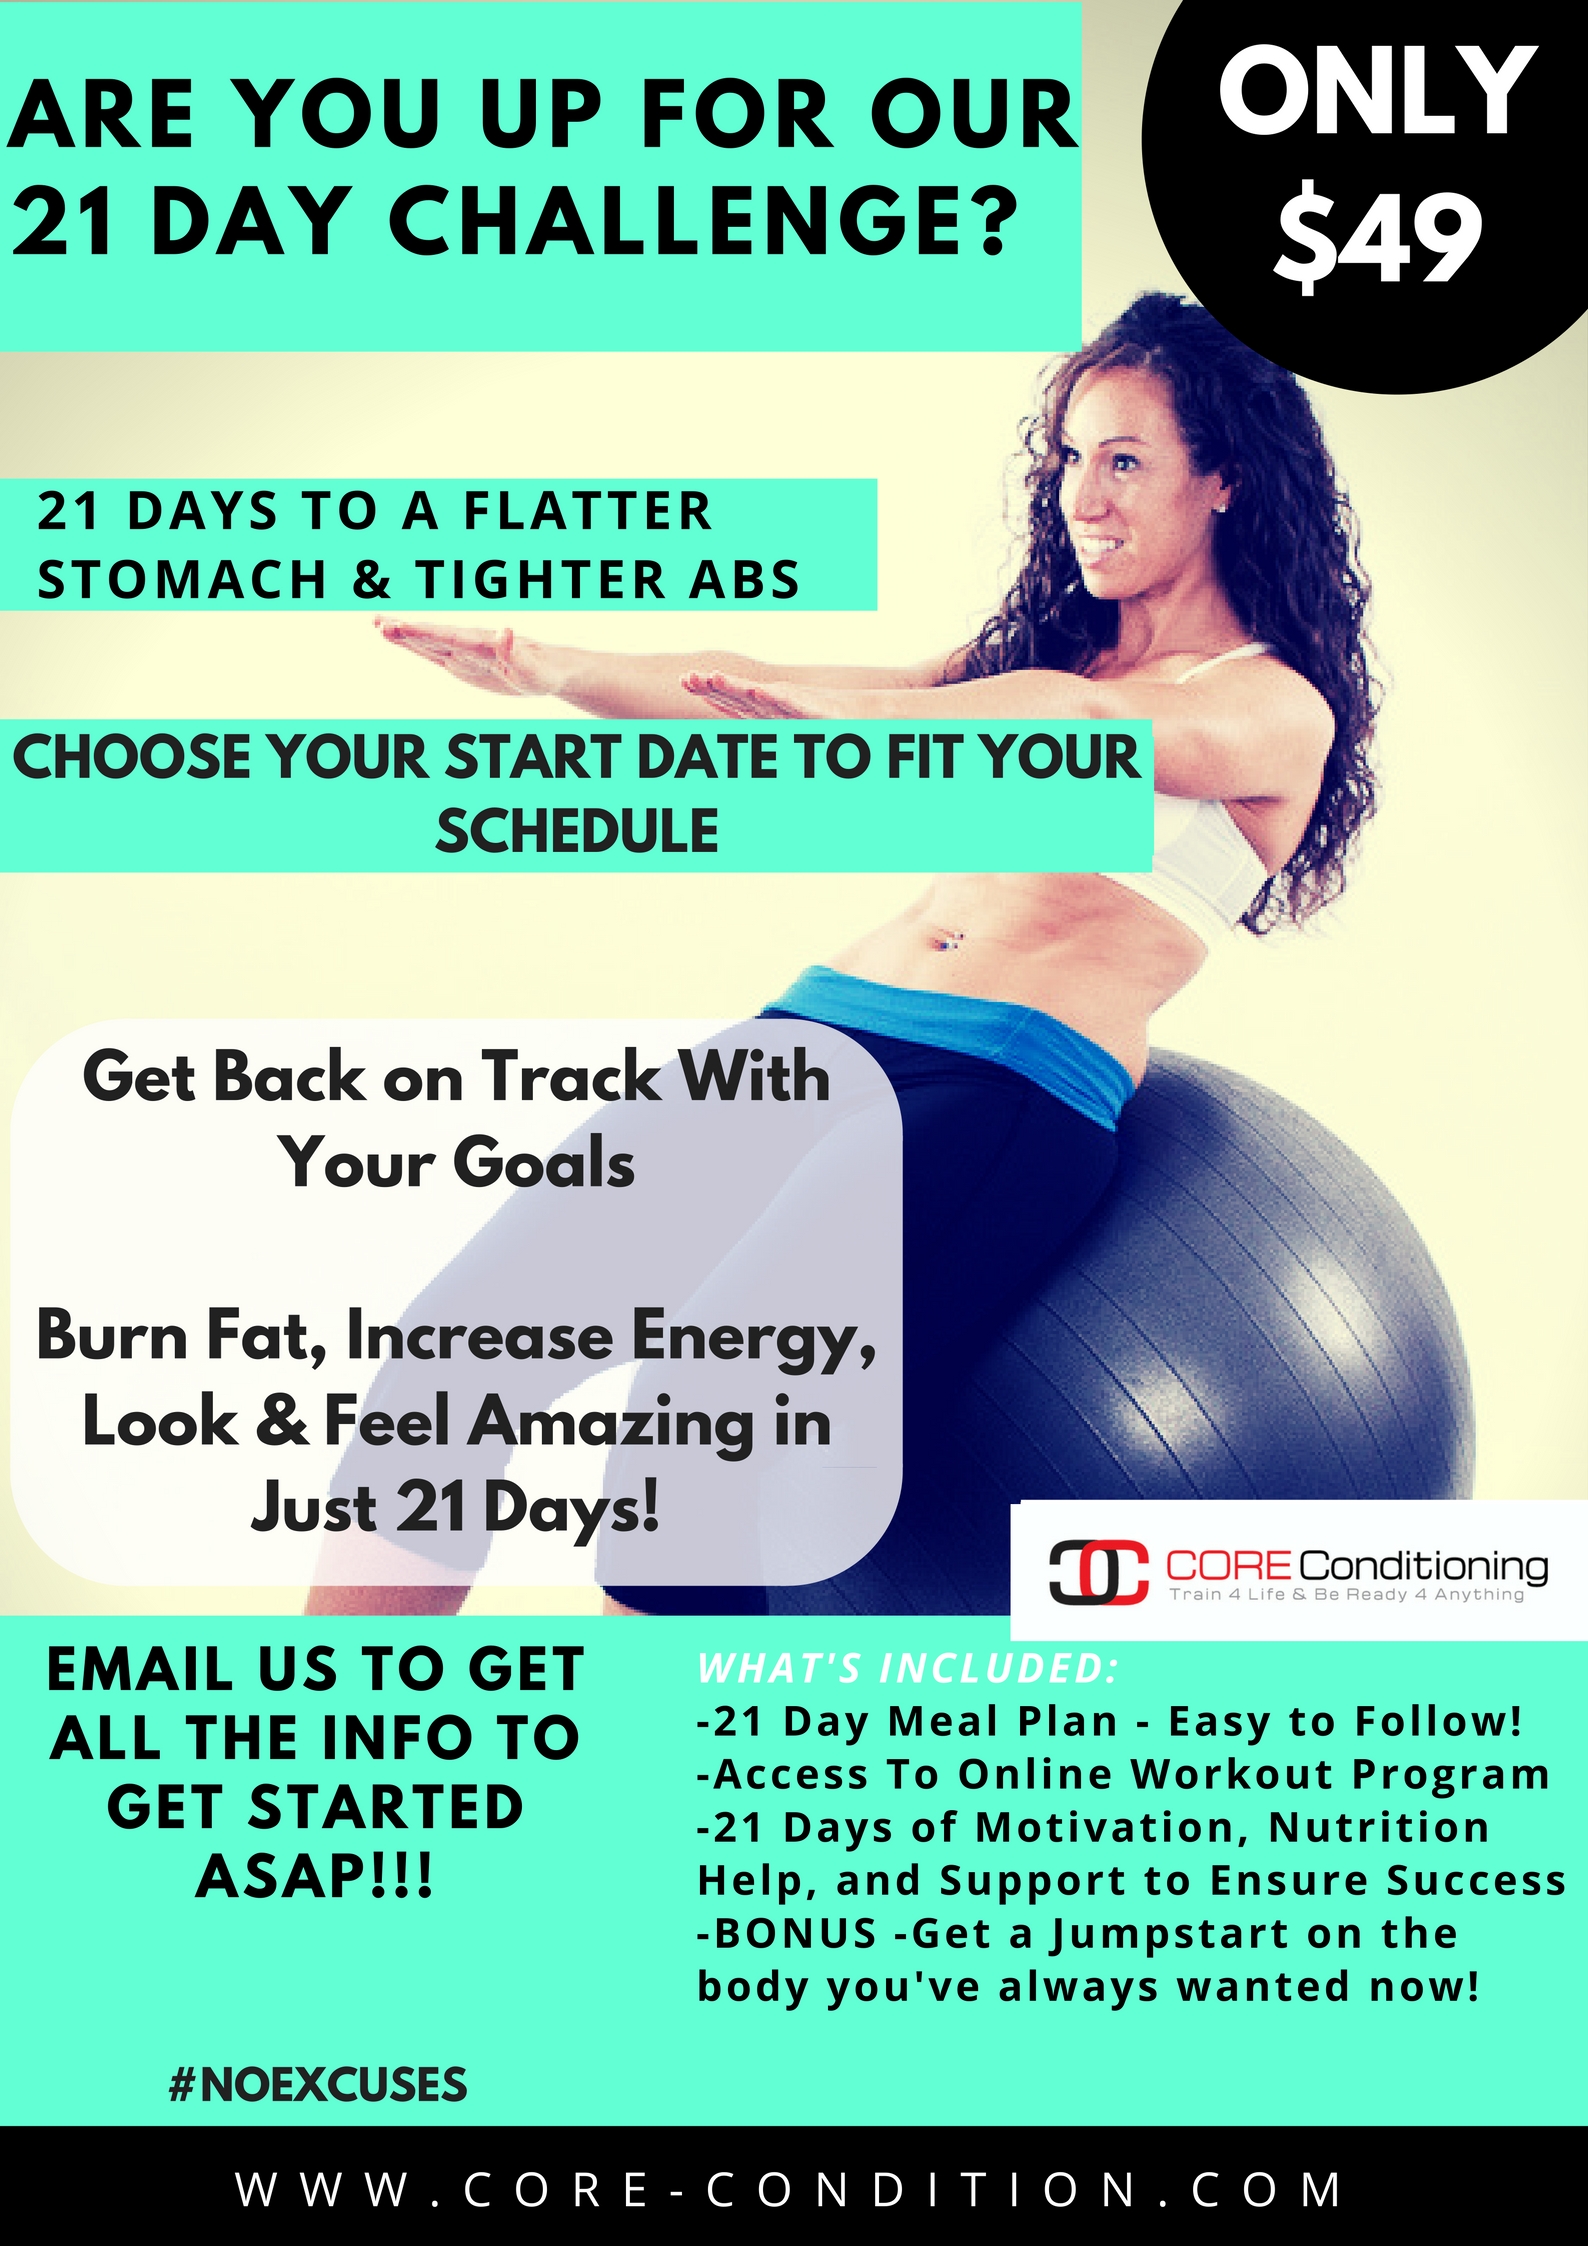 Are You Ready To Take Our 21 Day Challenge? Start Whenever You Want!